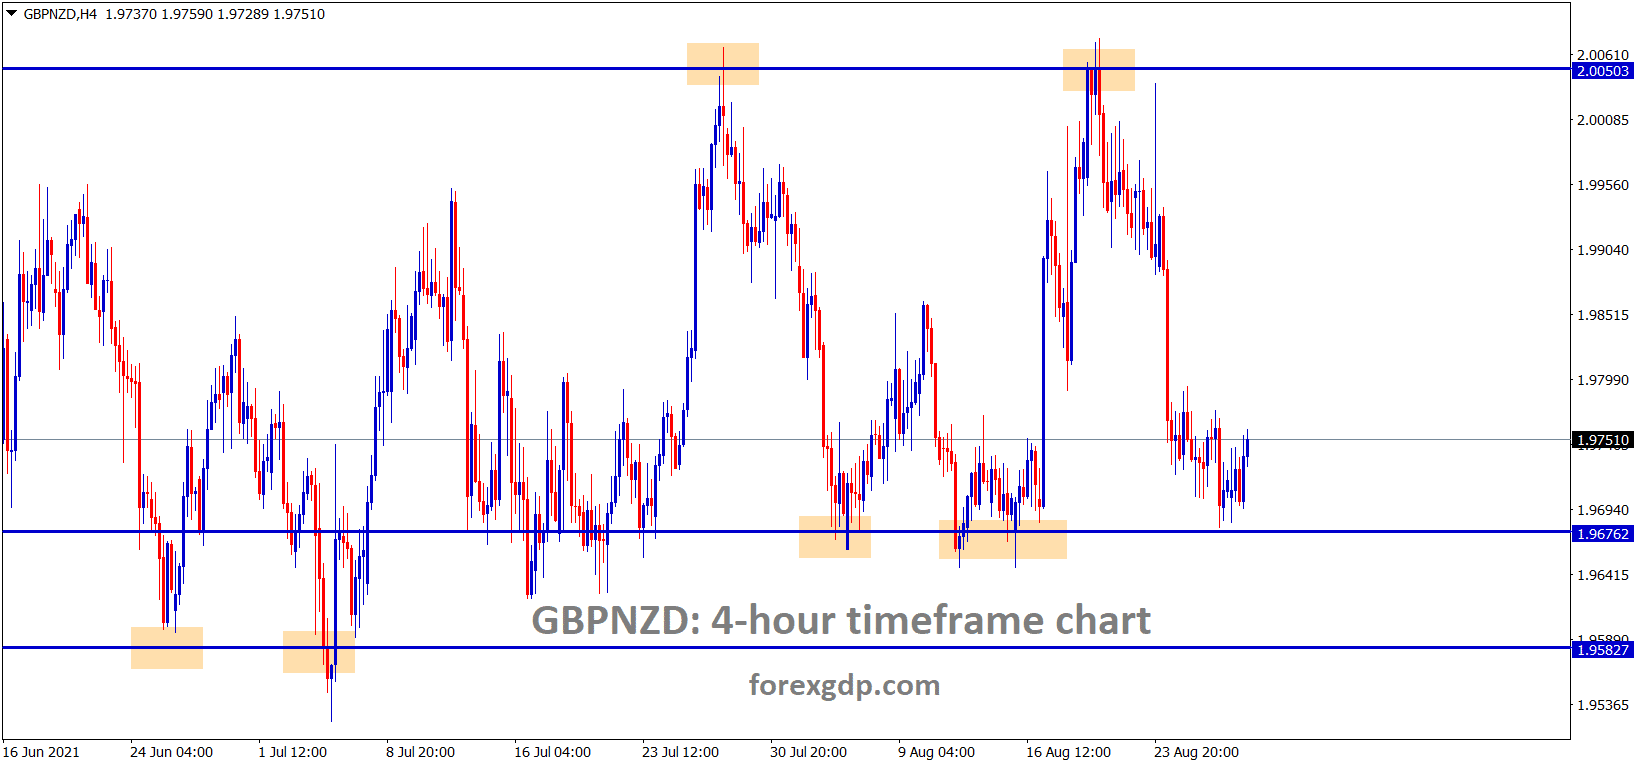 GBPNZD has rebounded a little bit after hitting the support area